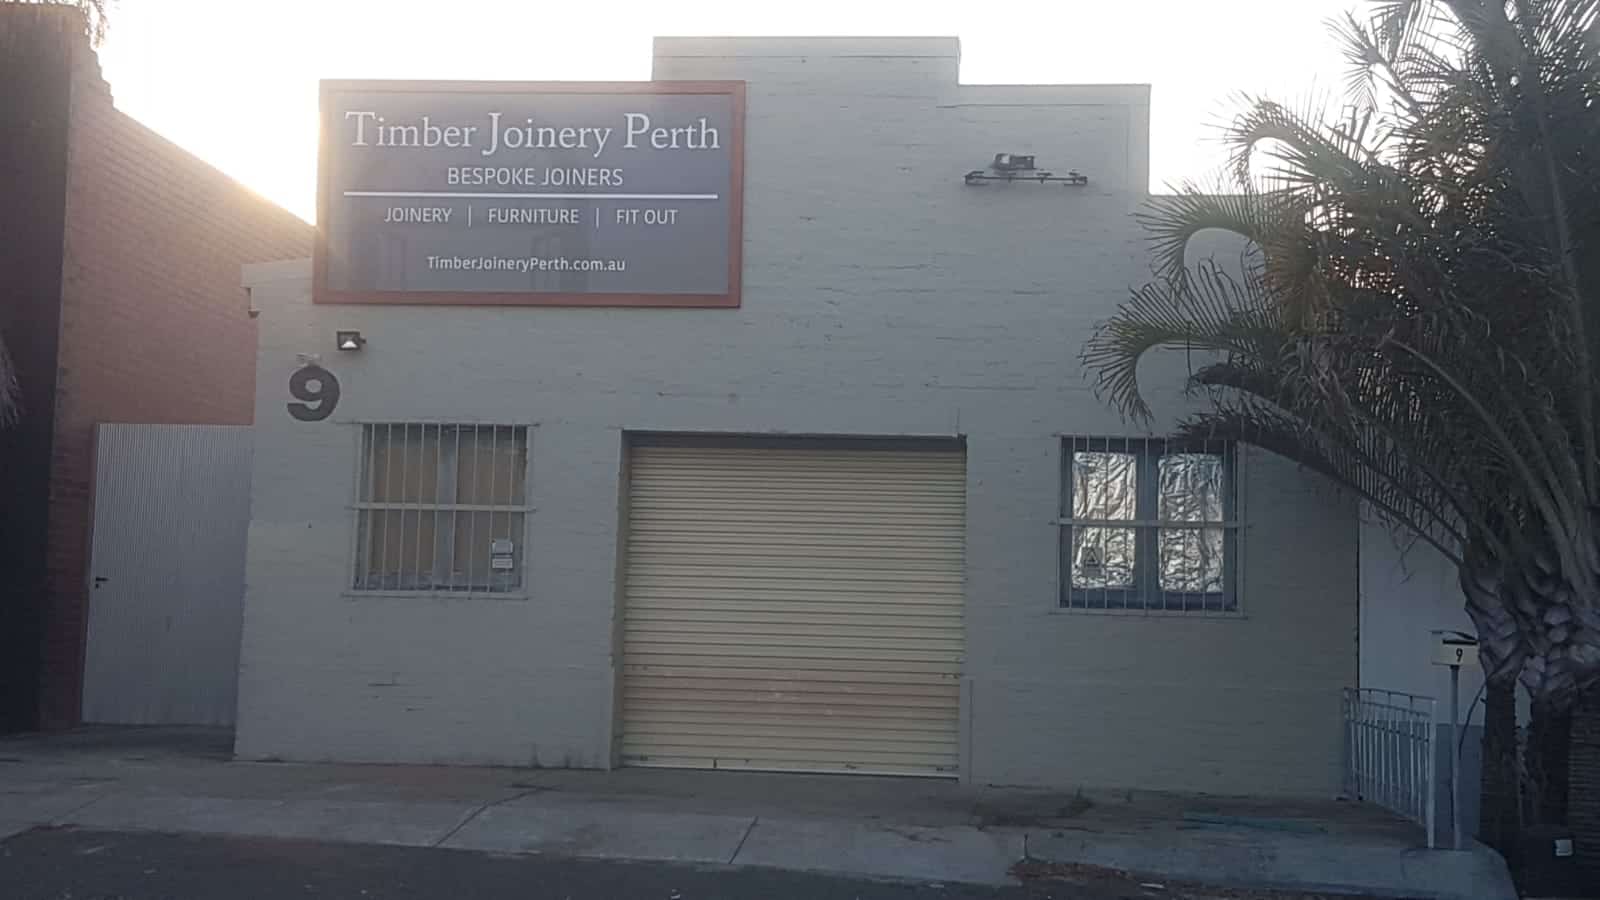 Timber Joinery Perth's workshop exterior